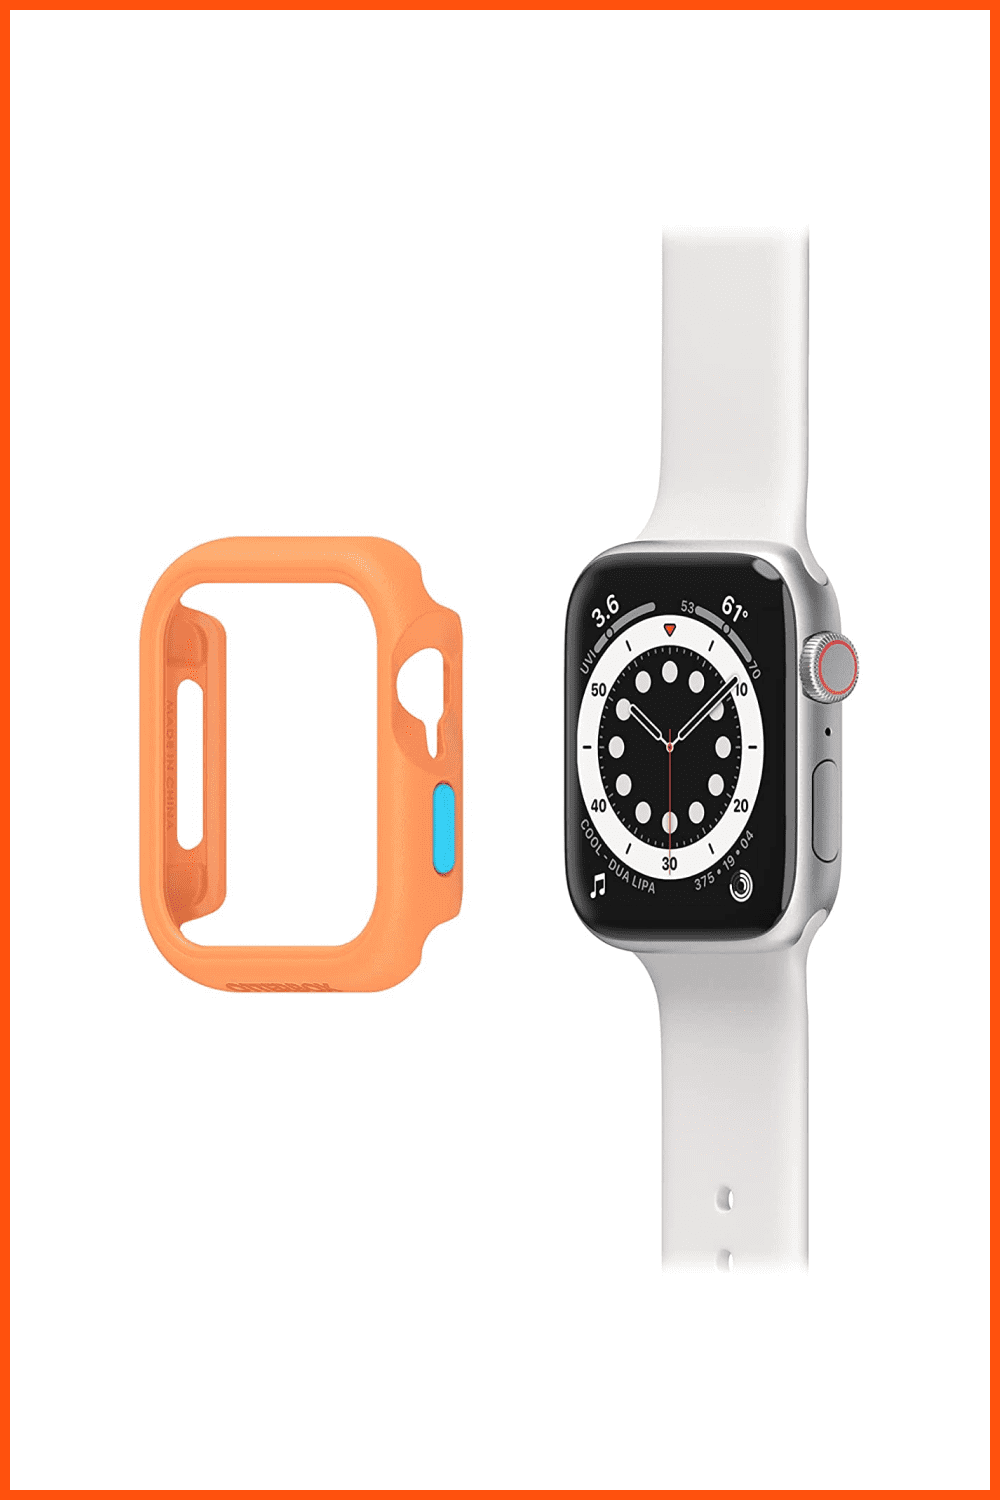 OtterBox Case for Apple Watches with bright design.